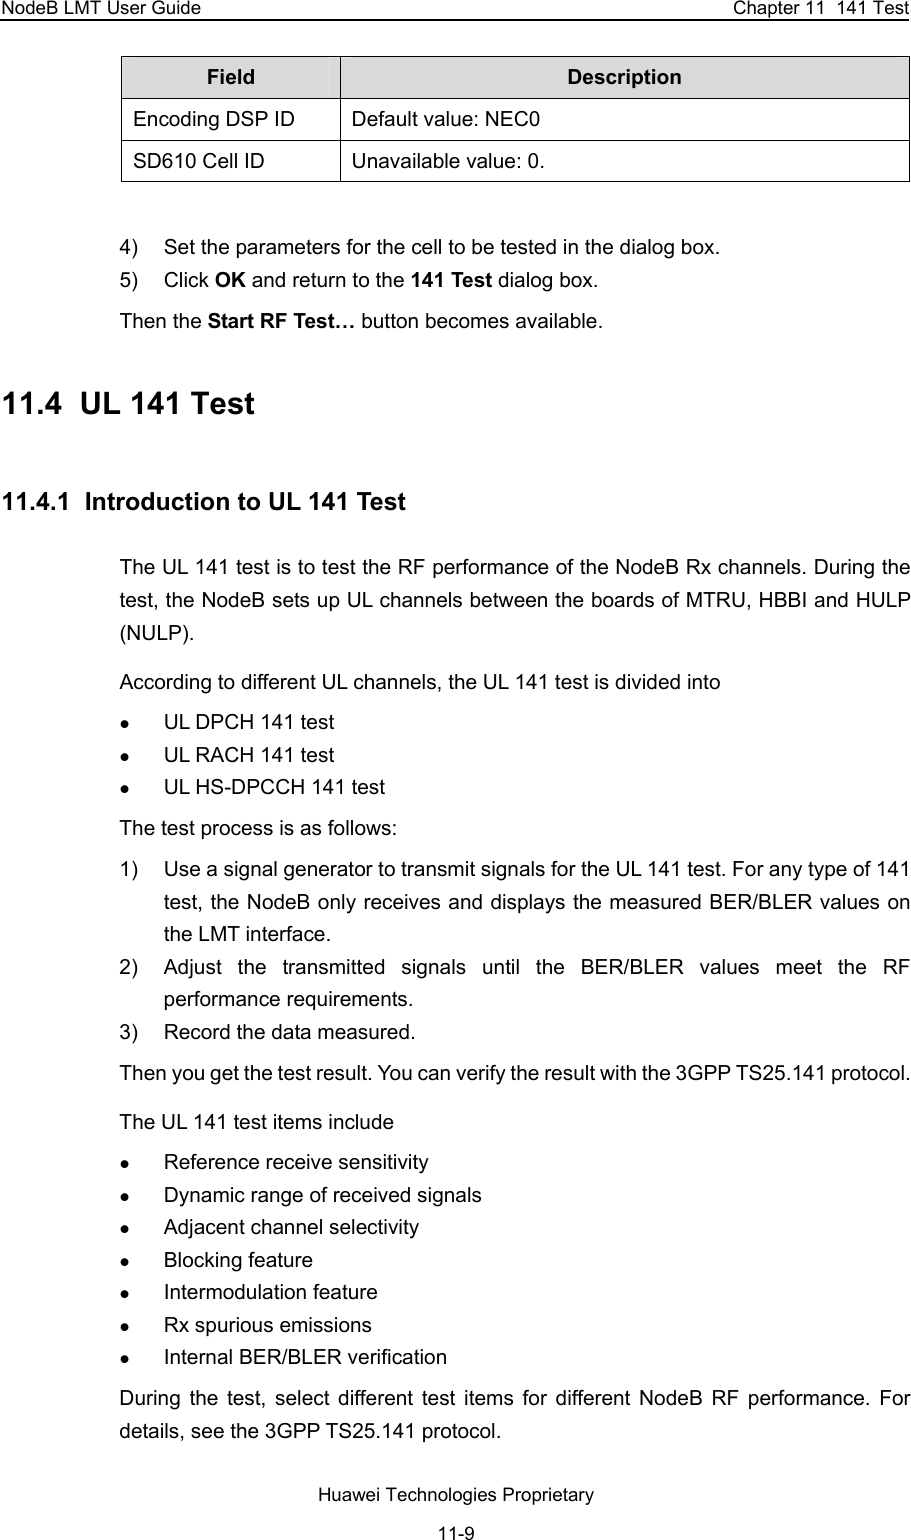 NodeB LMT User Guide  Chapter 11  141 Test Field  Description  Encoding DSP ID  Default value: NEC0 SD610 Cell ID  Unavailable value: 0.   4)  Set the parameters for the cell to be tested in the dialog box.  5) Click OK and return to the 141 Test dialog box.  Then the Start RF Test… button becomes available.  11.4  UL 141 Test 11.4.1  Introduction to UL 141 Test The UL 141 test is to test the RF performance of the NodeB Rx channels. During the test, the NodeB sets up UL channels between the boards of MTRU, HBBI and HULP (NULP).  According to different UL channels, the UL 141 test is divided into z UL DPCH 141 test z UL RACH 141 test z UL HS-DPCCH 141 test The test process is as follows: 1)  Use a signal generator to transmit signals for the UL 141 test. For any type of 141 test, the NodeB only receives and displays the measured BER/BLER values on the LMT interface.  2)  Adjust the transmitted signals until the BER/BLER values meet the RF performance requirements.  3)  Record the data measured.  Then you get the test result. You can verify the result with the 3GPP TS25.141 protocol. The UL 141 test items include z Reference receive sensitivity  z Dynamic range of received signals z Adjacent channel selectivity z Blocking feature z Intermodulation feature z Rx spurious emissions z Internal BER/BLER verification During the test, select different test items for different NodeB RF performance. For details, see the 3GPP TS25.141 protocol.  Huawei Technologies Proprietary 11-9 